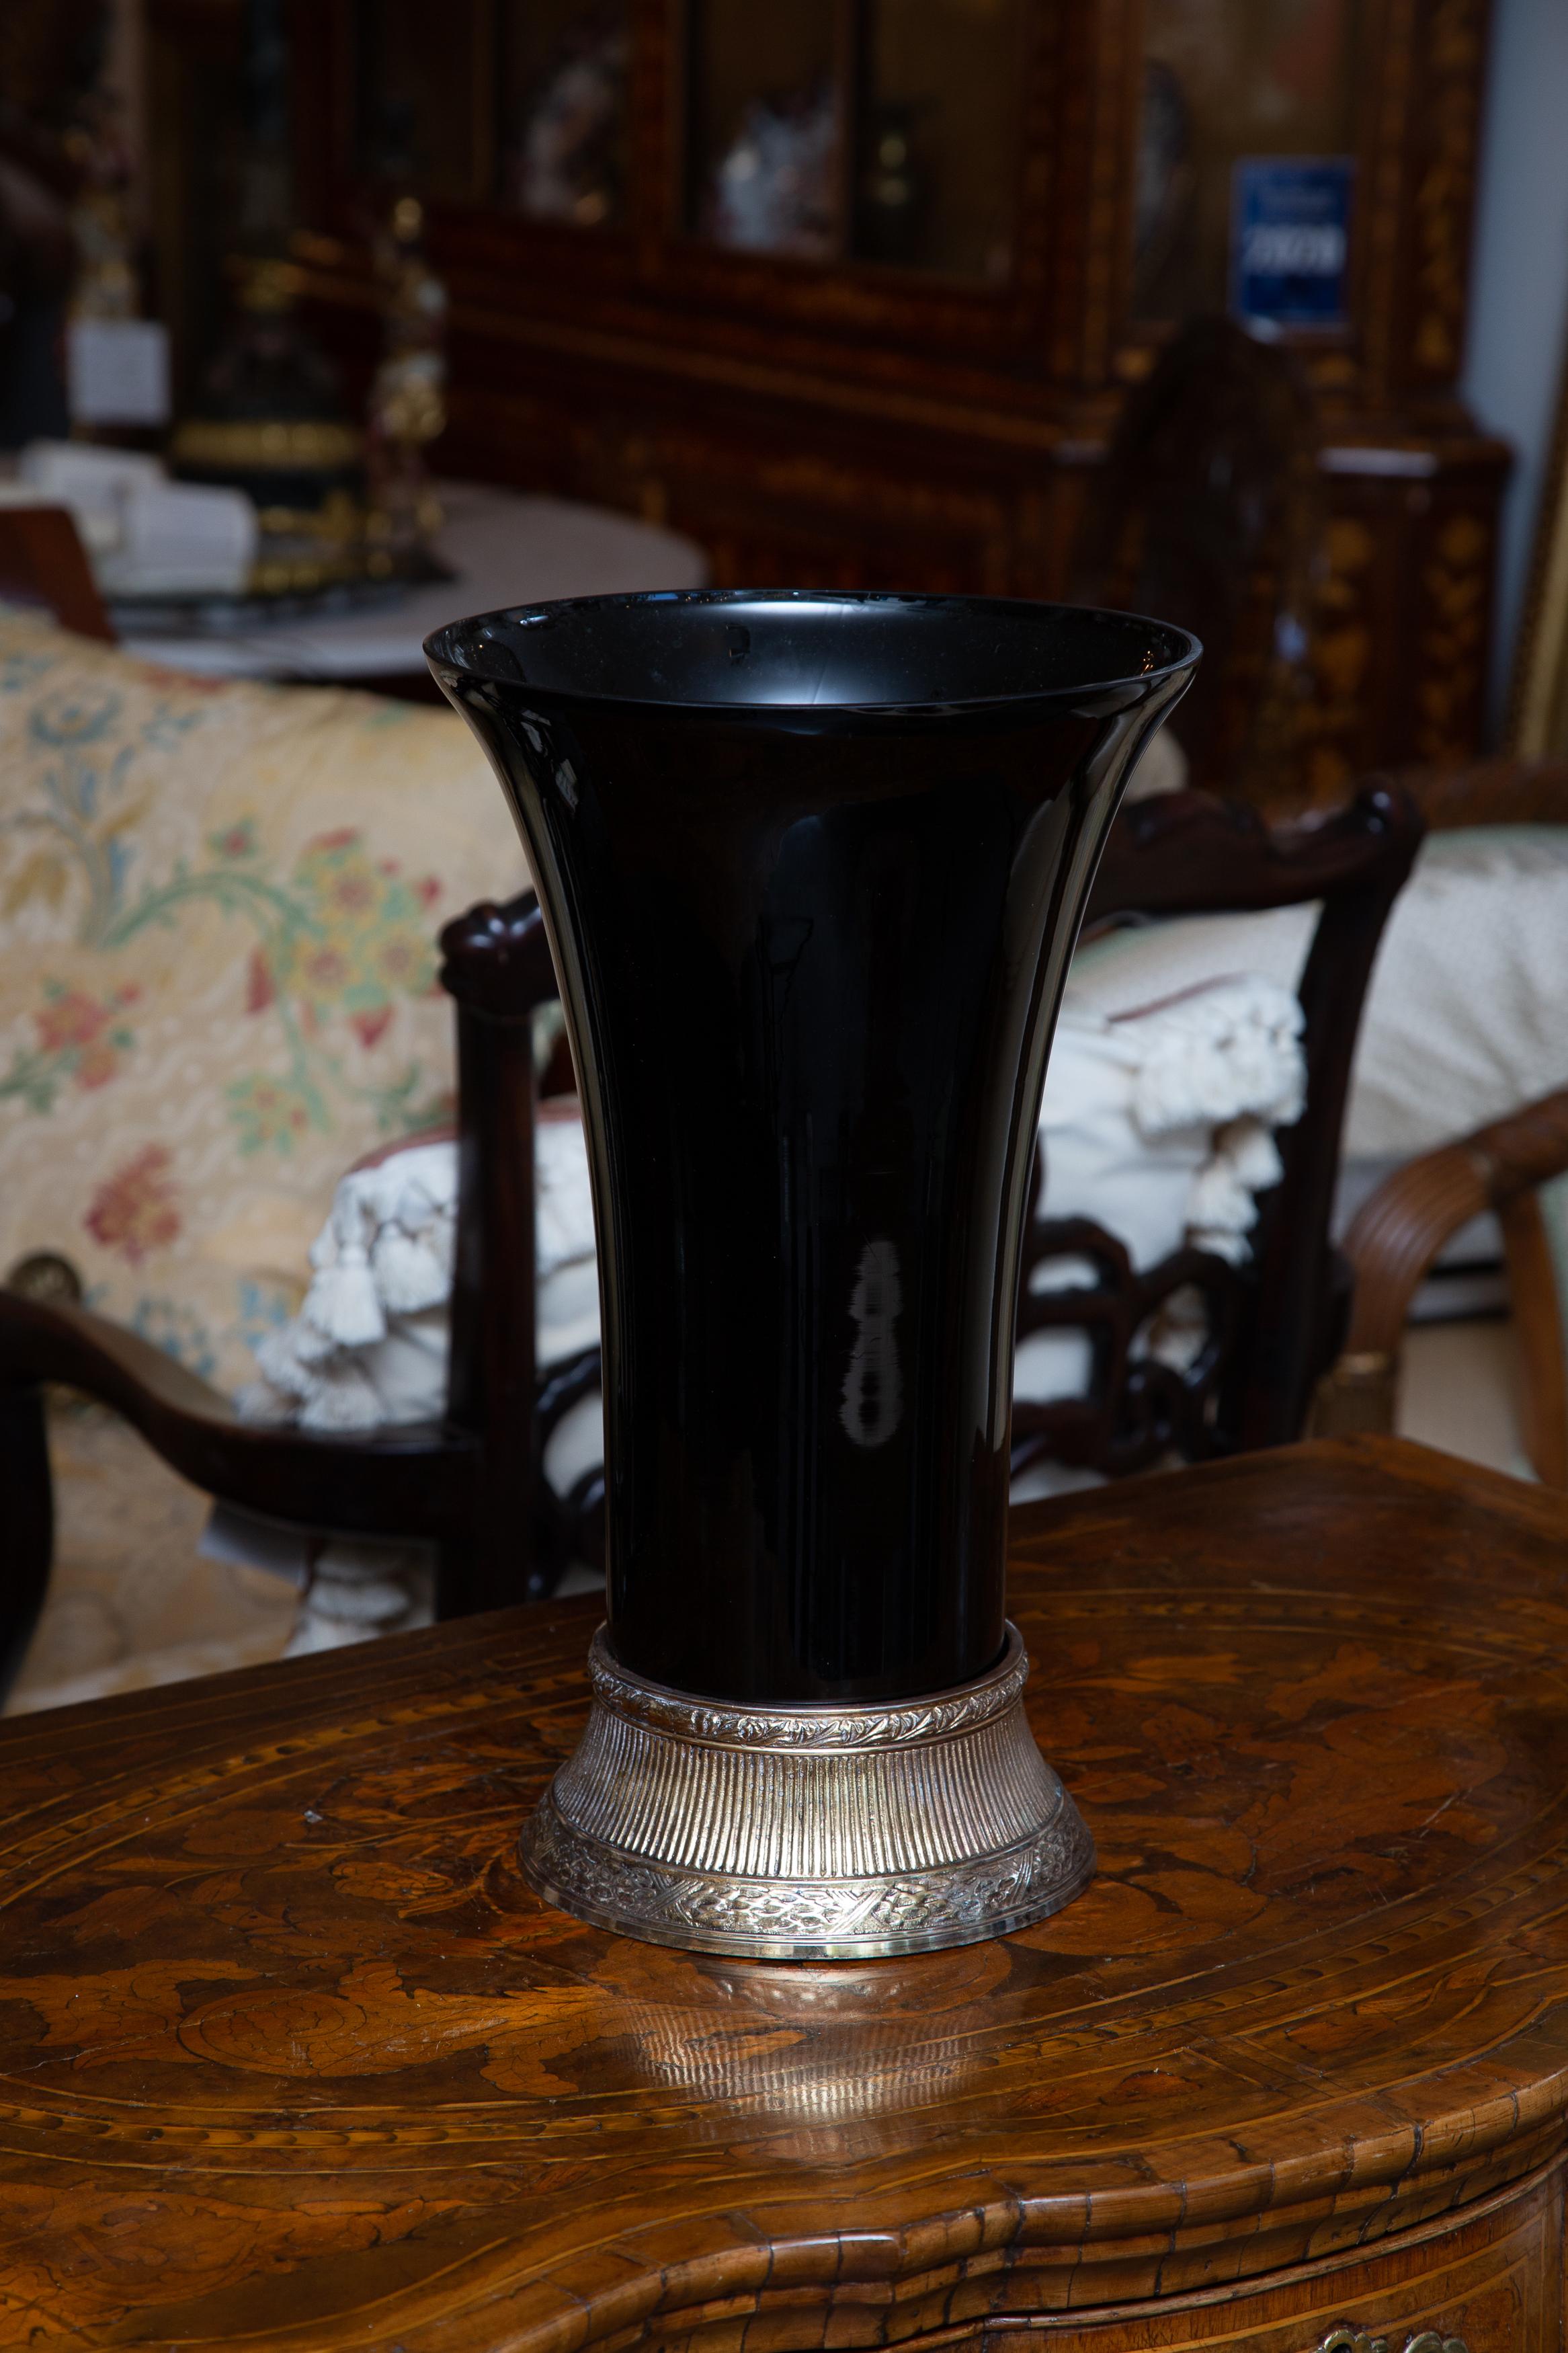 This is a sophisticated near-pair of Art Deco style black glass vases situated on silvered metal bases, 20th century. The larger vase is 8.75 inches in diameter and 14.5 inches high. The slightly smaller vase is 8.33 inches in diameter and 14 inches